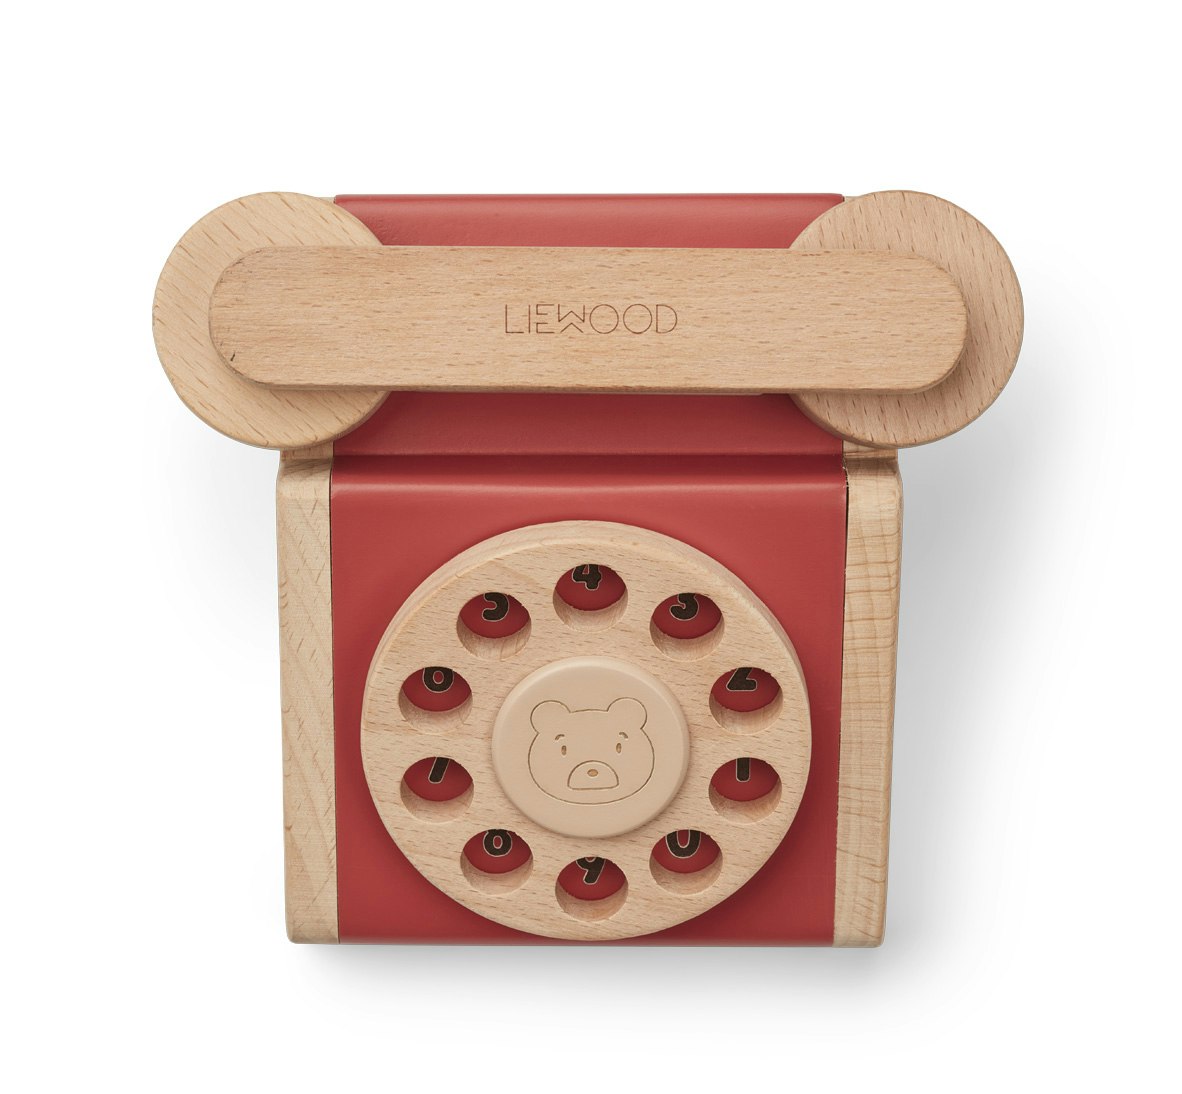 Liewood, Selma classic phone, Apple red pale tuscany rose 